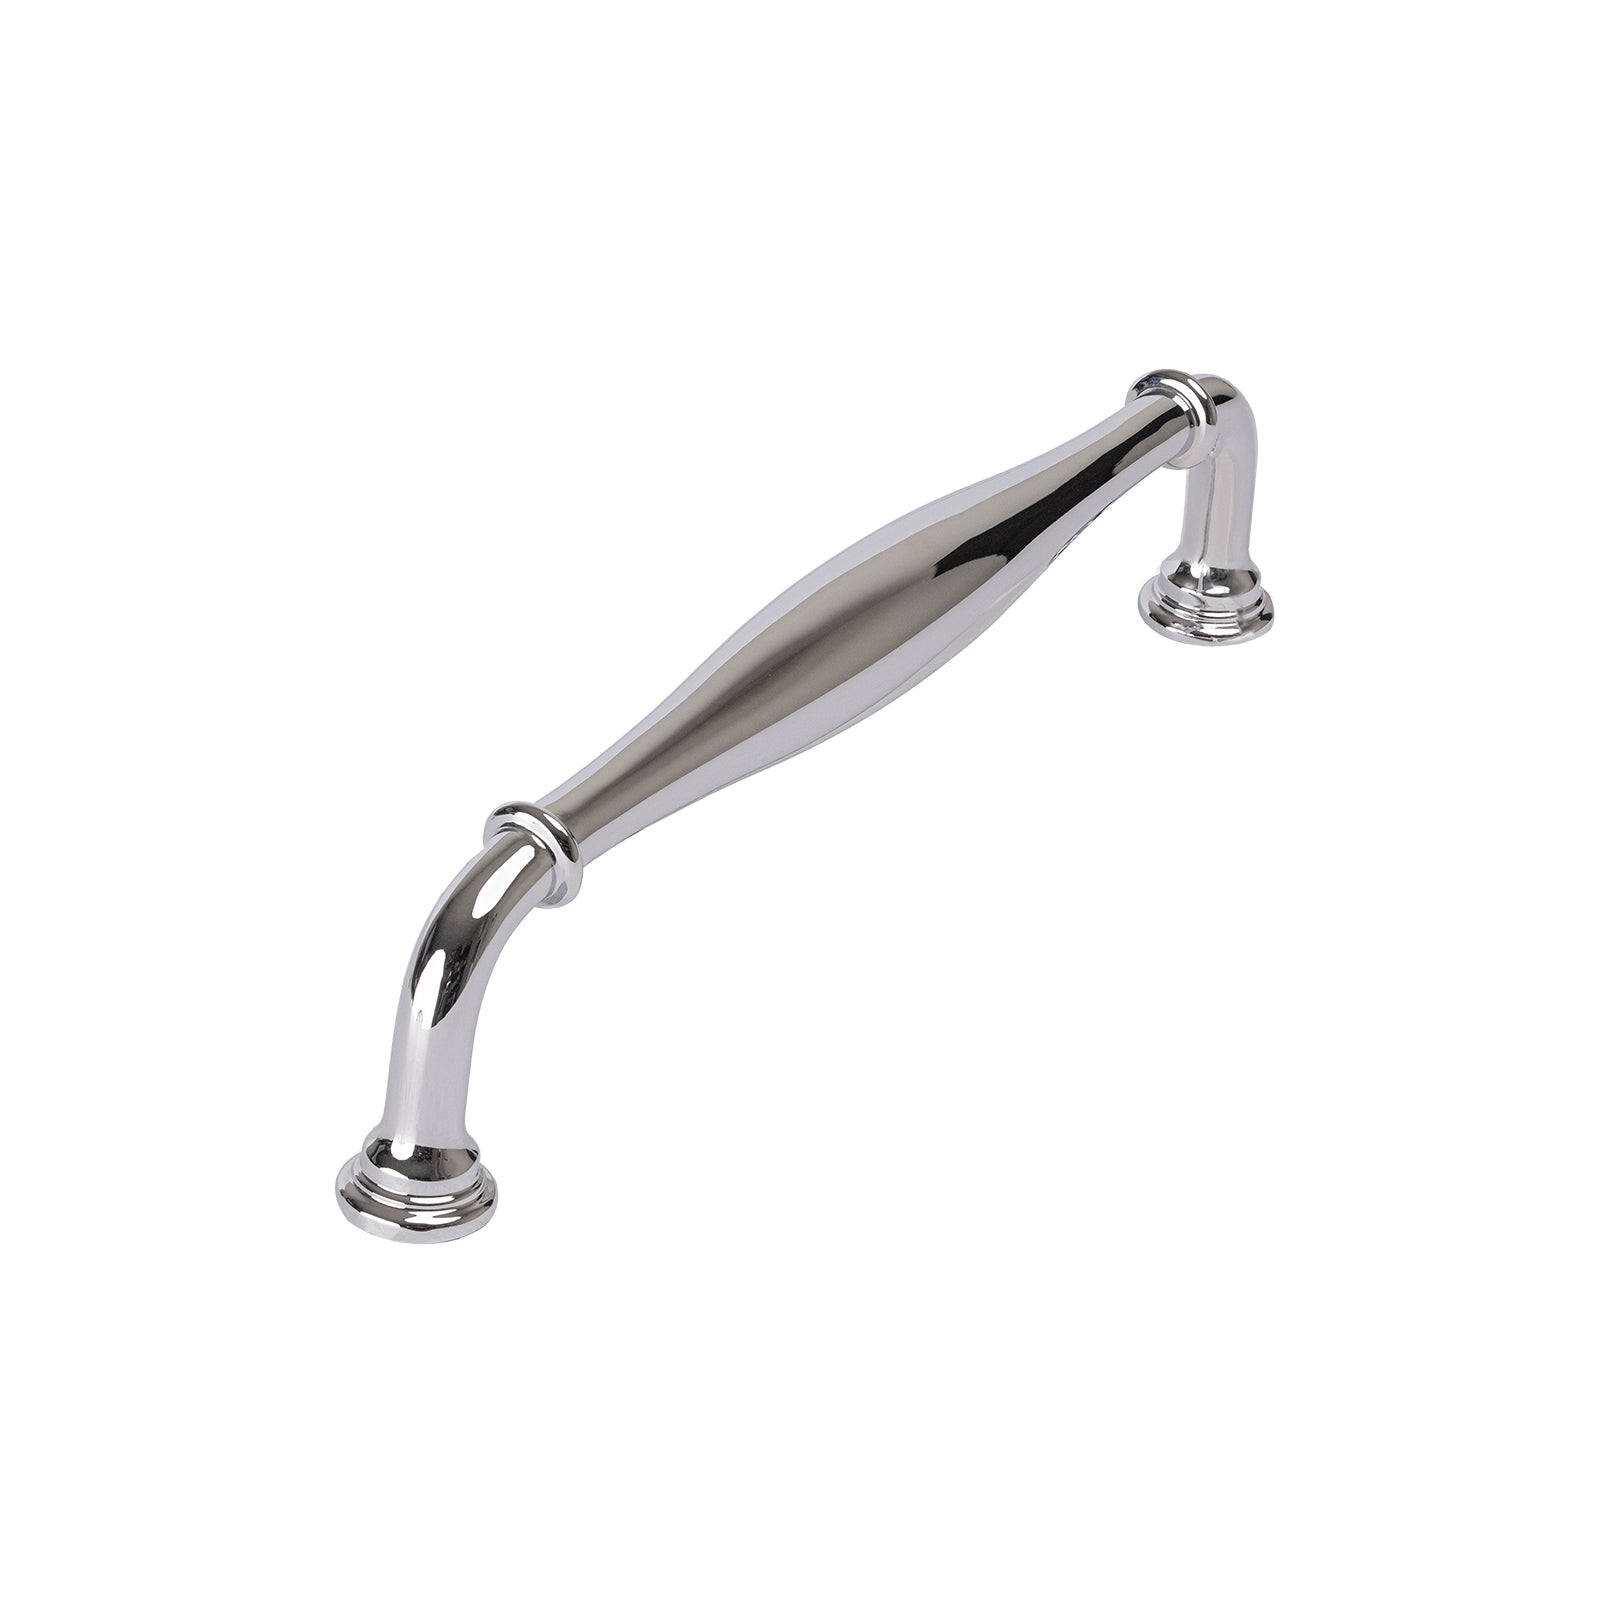 chrome kitchen pull handle, rear fix pull handle, chrome pull